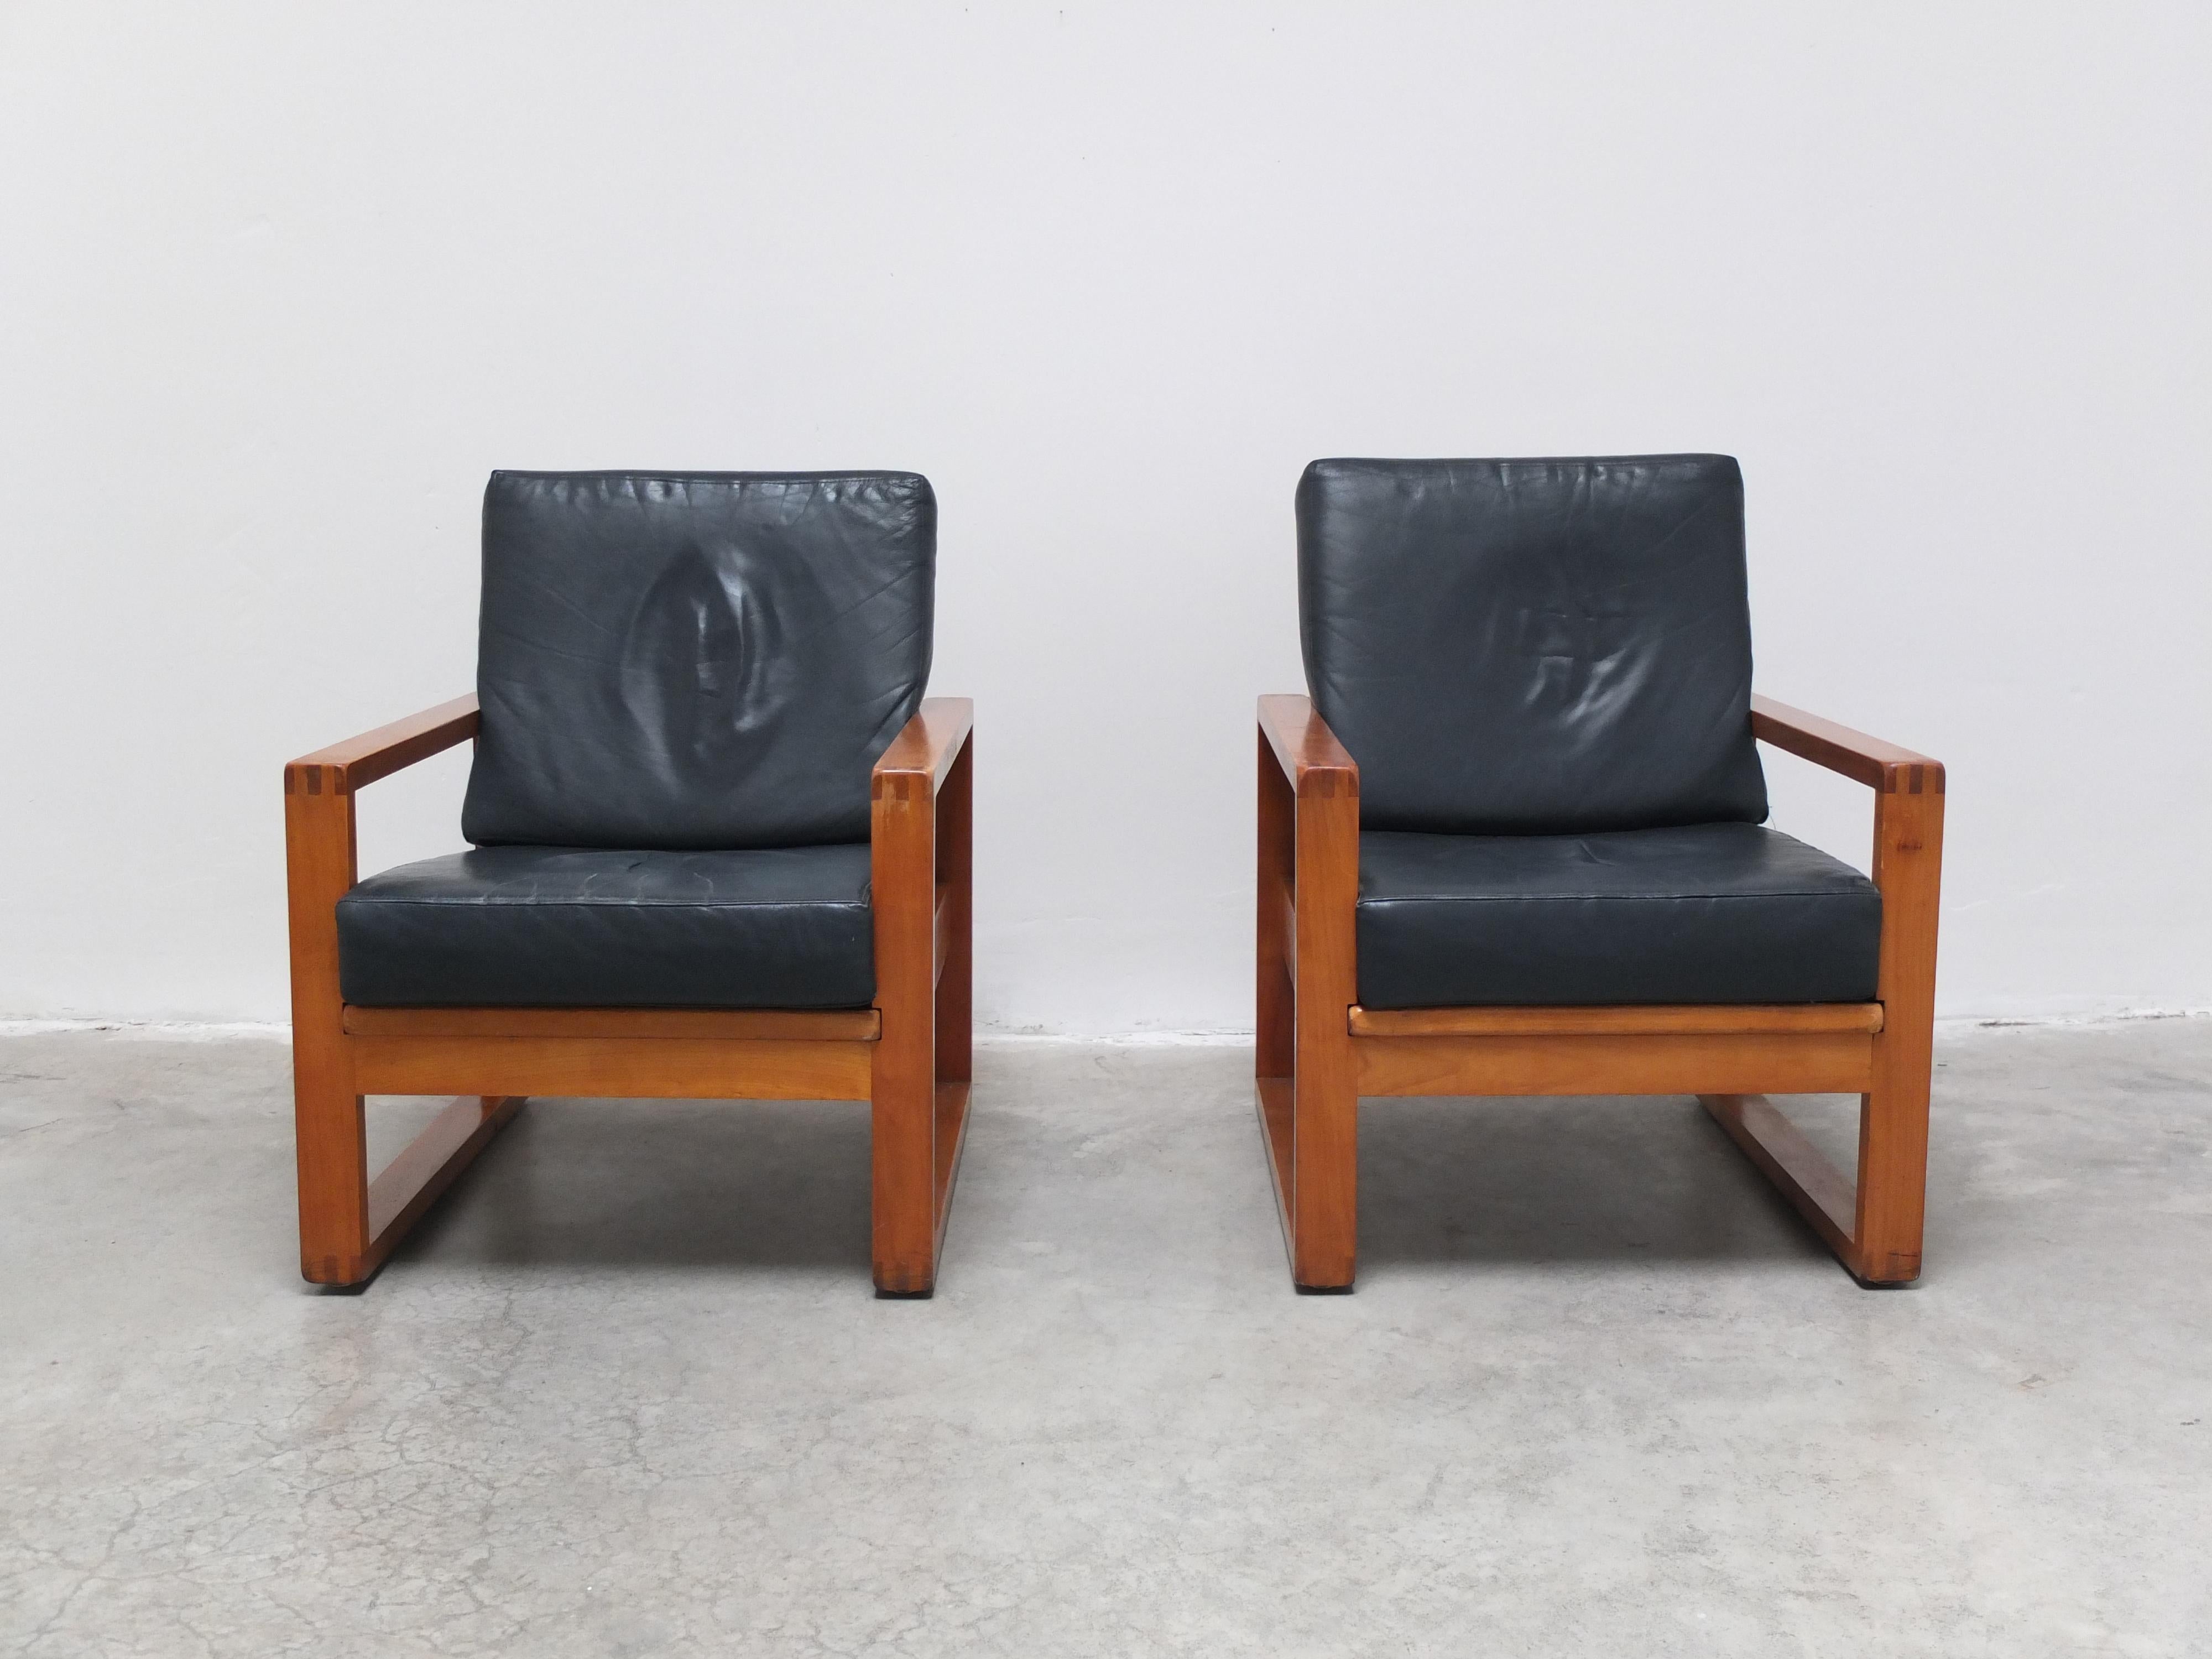 Exceptional pair of modernist lounge chairs. They are produced in the factory of Van Den Berghe-Pauvers in Ghent during the 1960s by an employee who wanted to make some nice chairs for himself. He was clearly inspired by ‘Model 2256’ by Børge